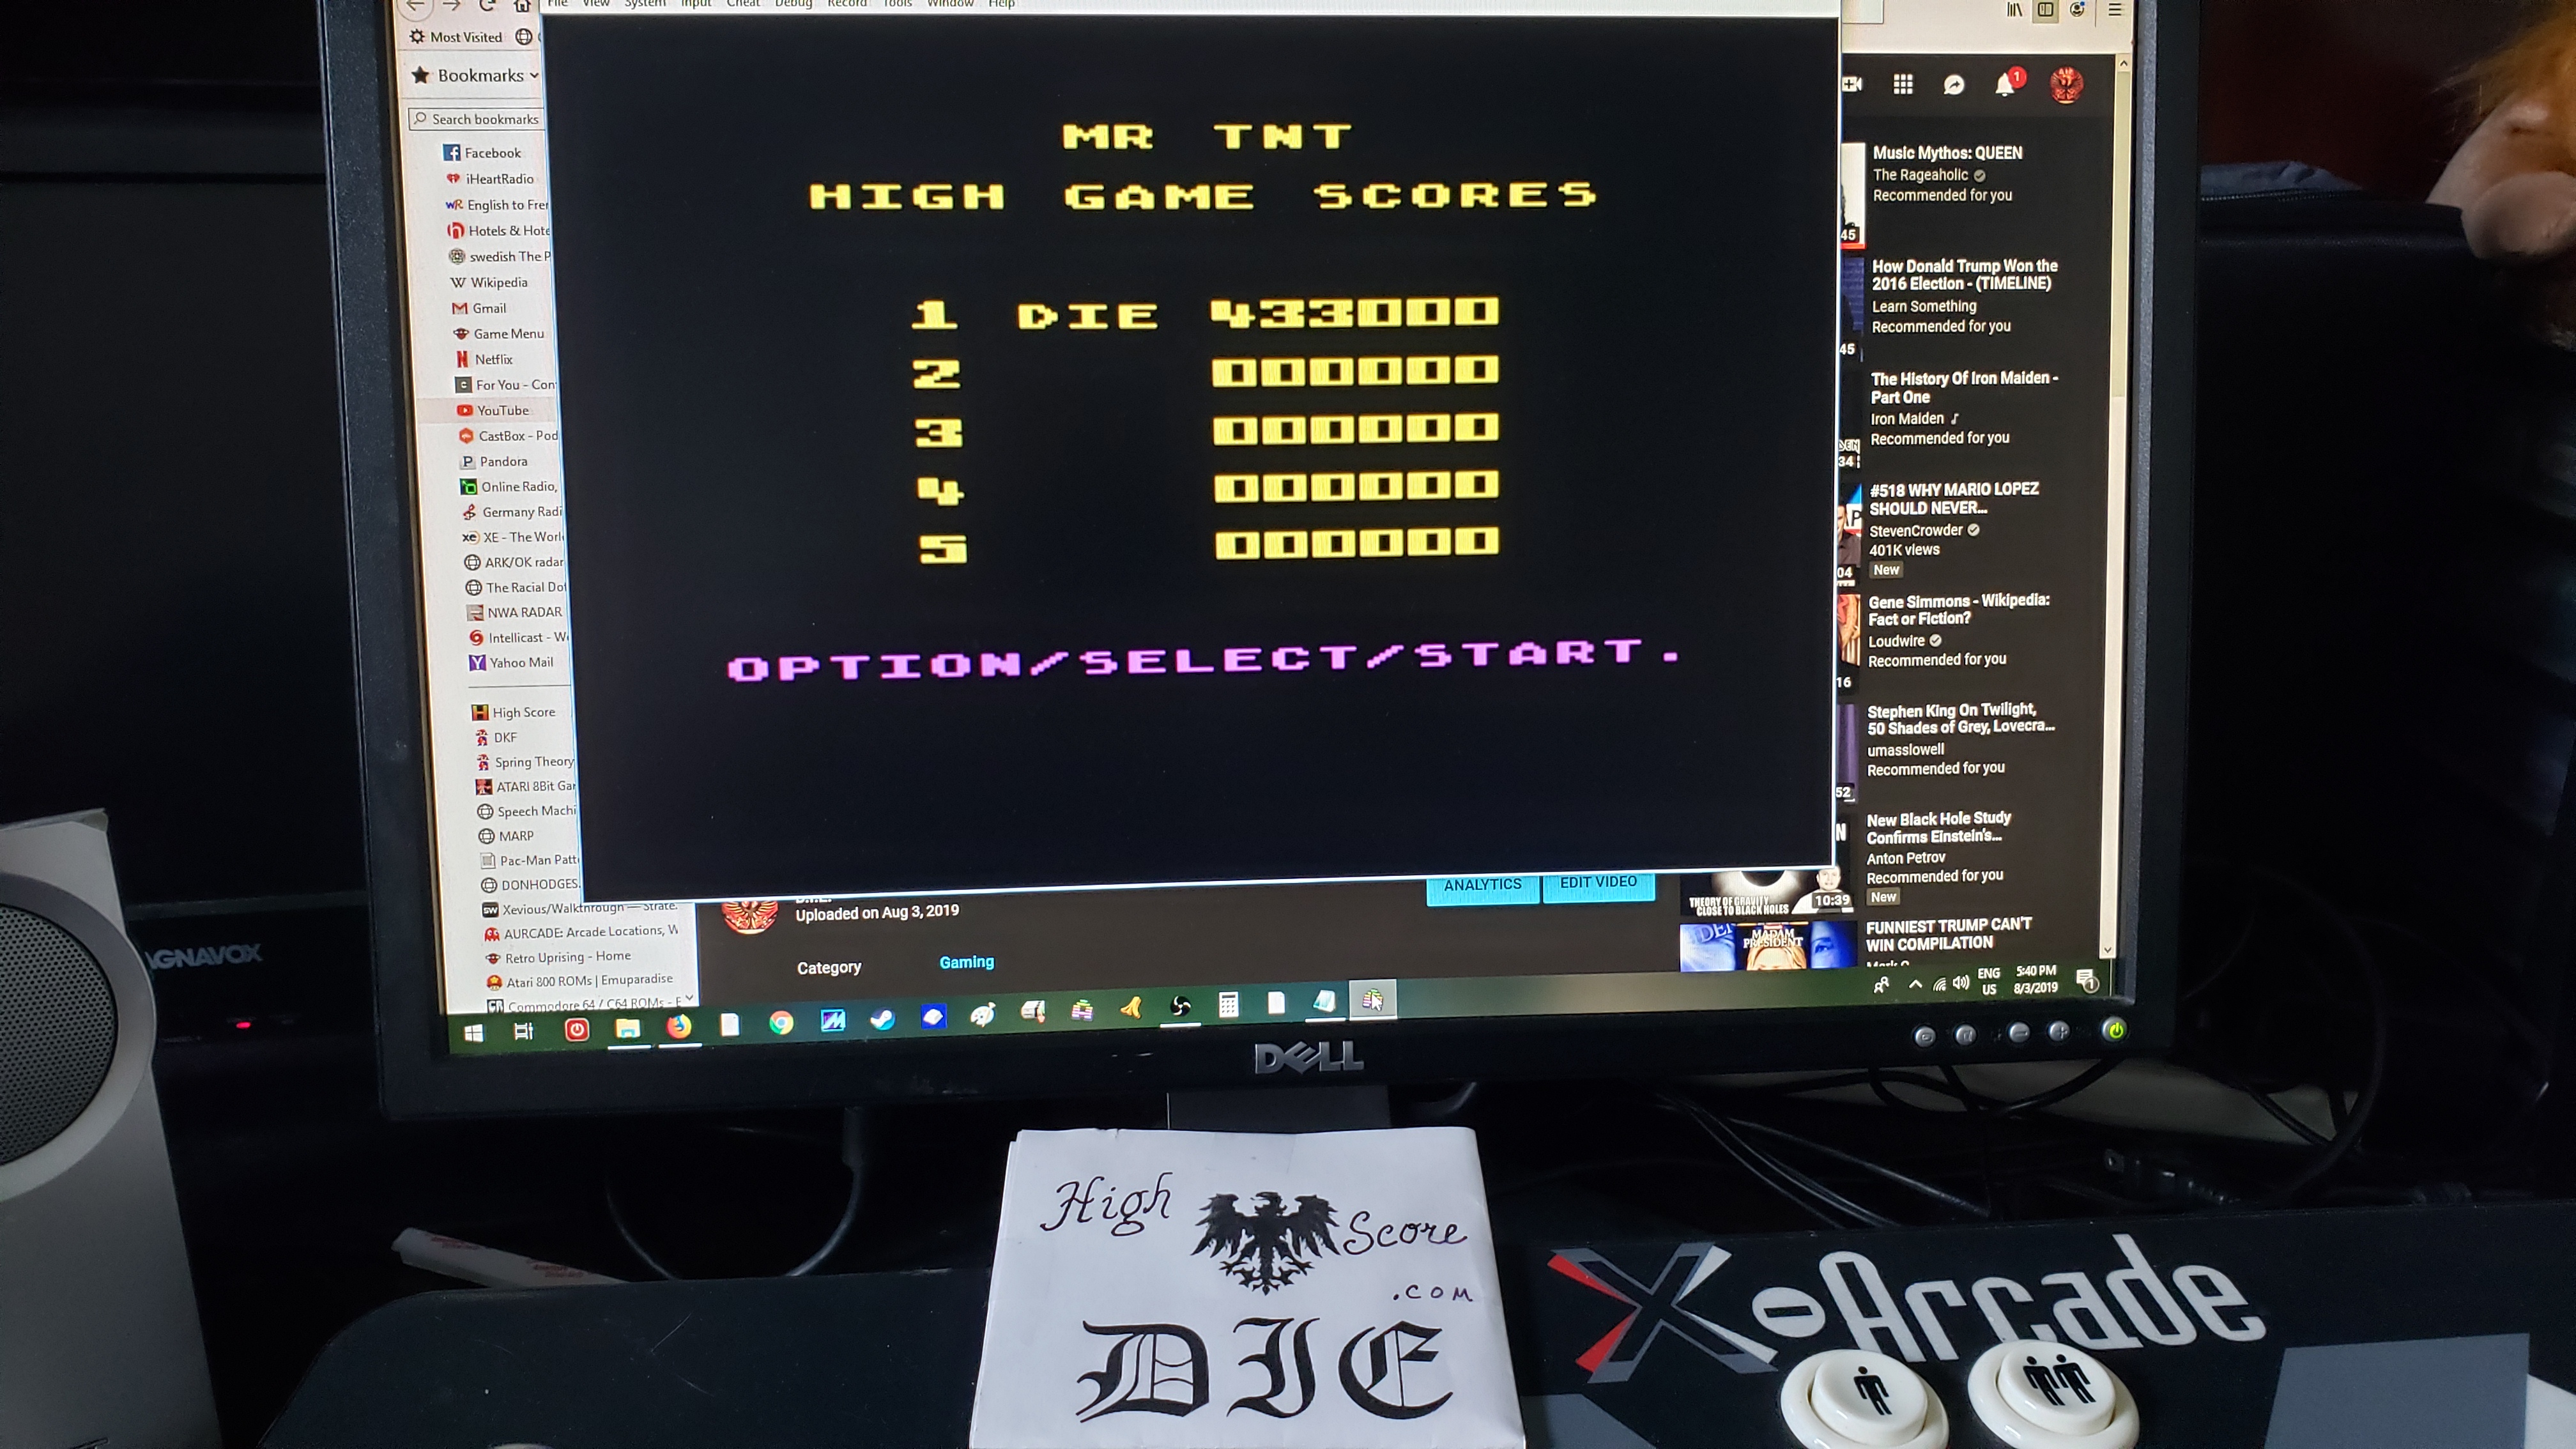 MikeDietrich: Mr. TNT (Atari 400/800/XL/XE Emulated) 433,000 points on 2019-08-03 16:41:50